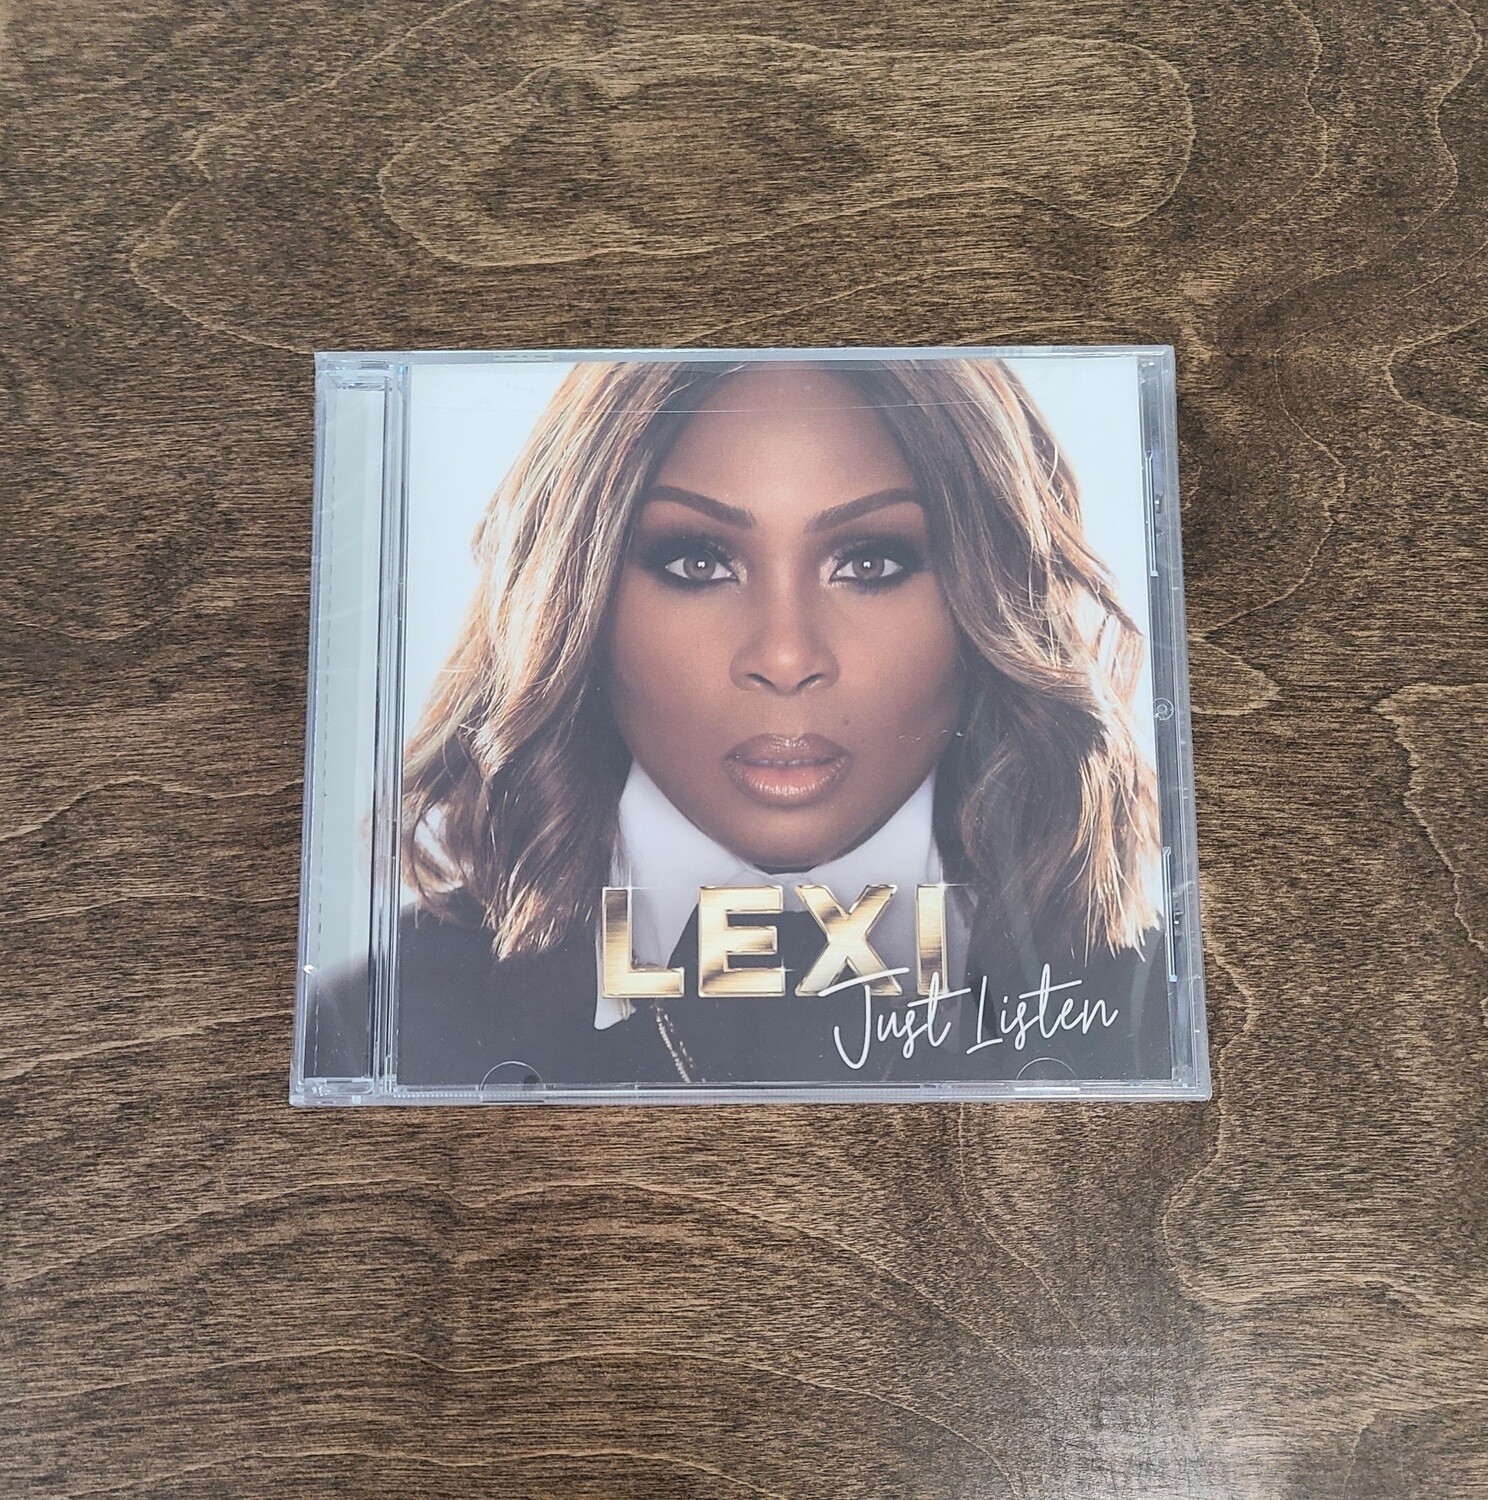 Just Listen by Lexi CD